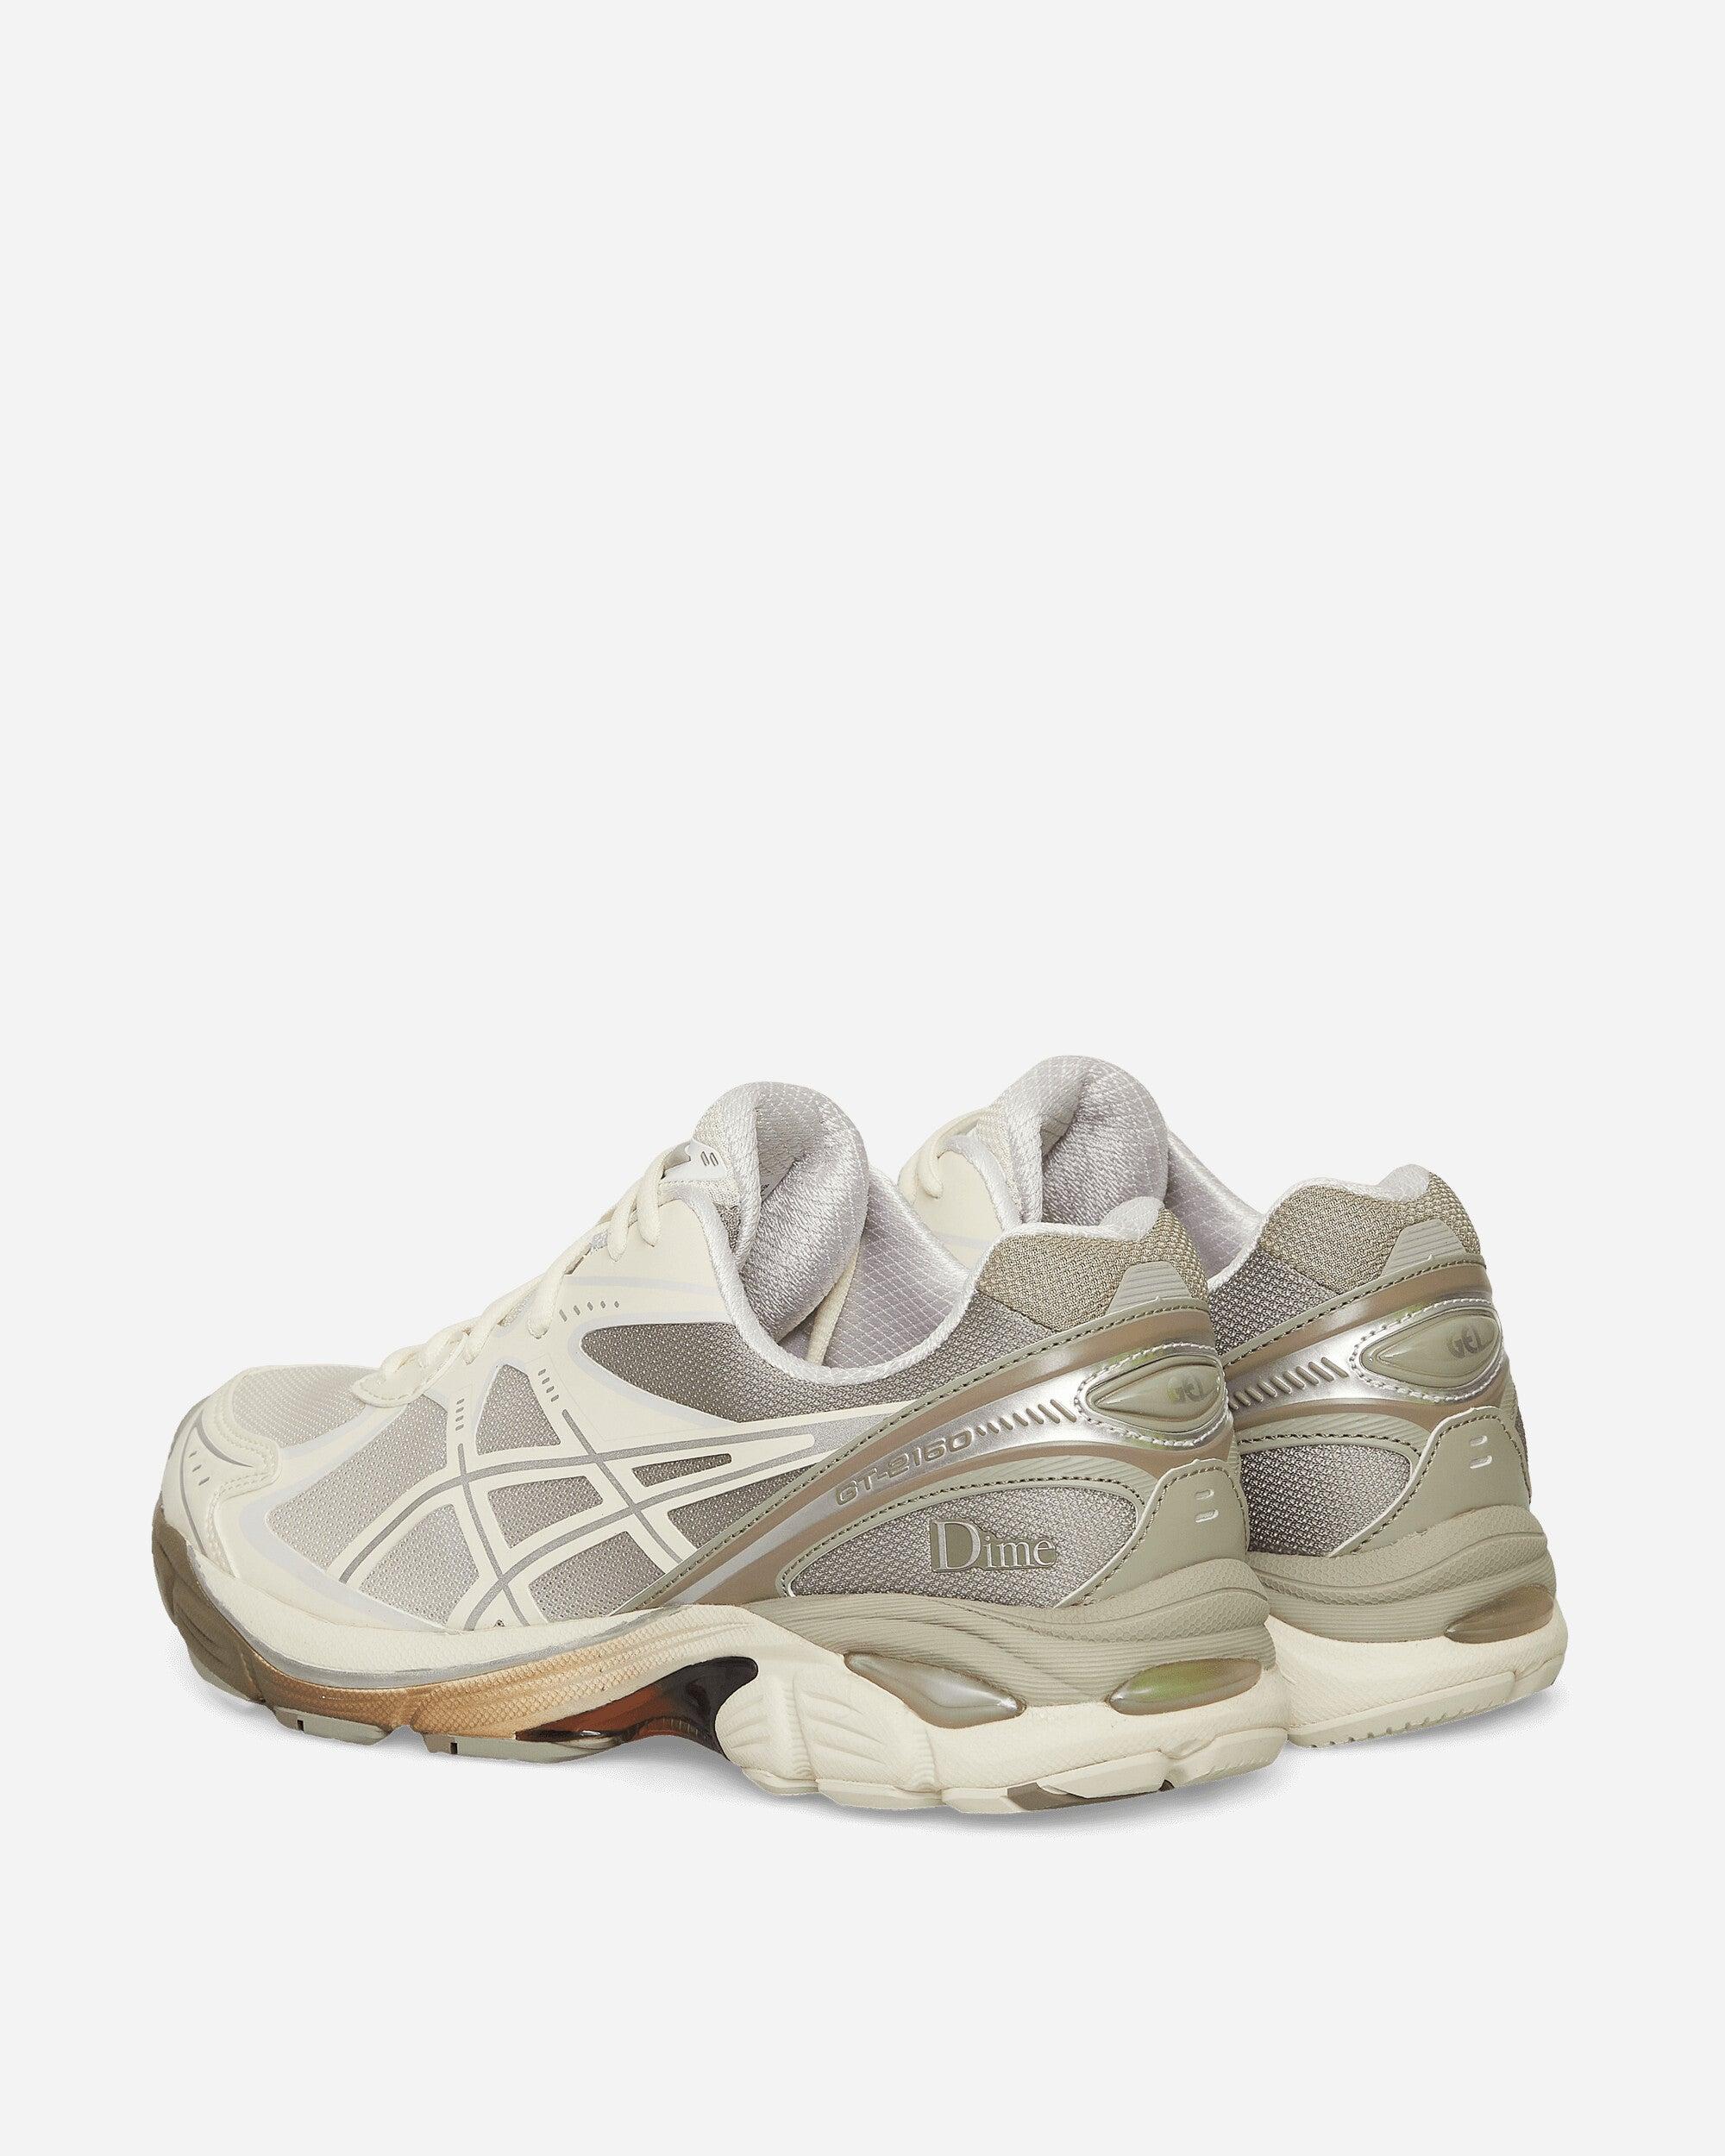 Asics Dime Gt-2160 Sneakers Arctic Wolf / London Fog in White | Lyst